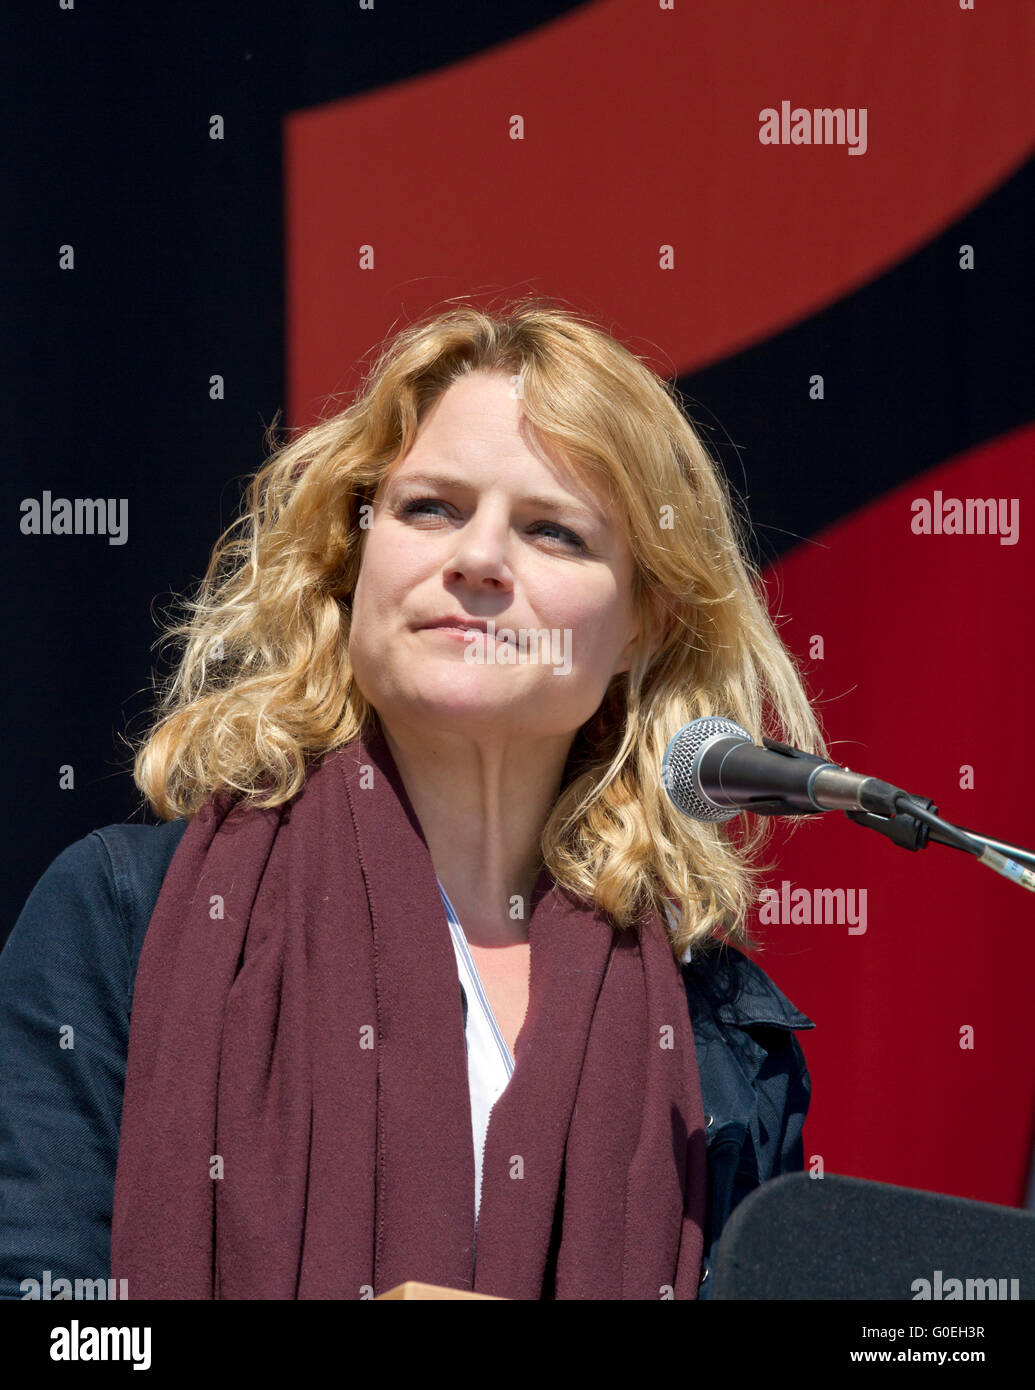 Copenhagen, Denmark, 1st May, 2016. Member of Parliament and political spokesperson for the Red-Green Alliance party (Enhedslisten), Johanne Schmidt Nielsen, speaks at The International Workers’ Day, Labour Day, in Faelledparken, the Copenhagen Common. A popular campaign and festival day full of political speeches and entertainment. Credit:  Niels Quist/Alamy Live News Stock Photo